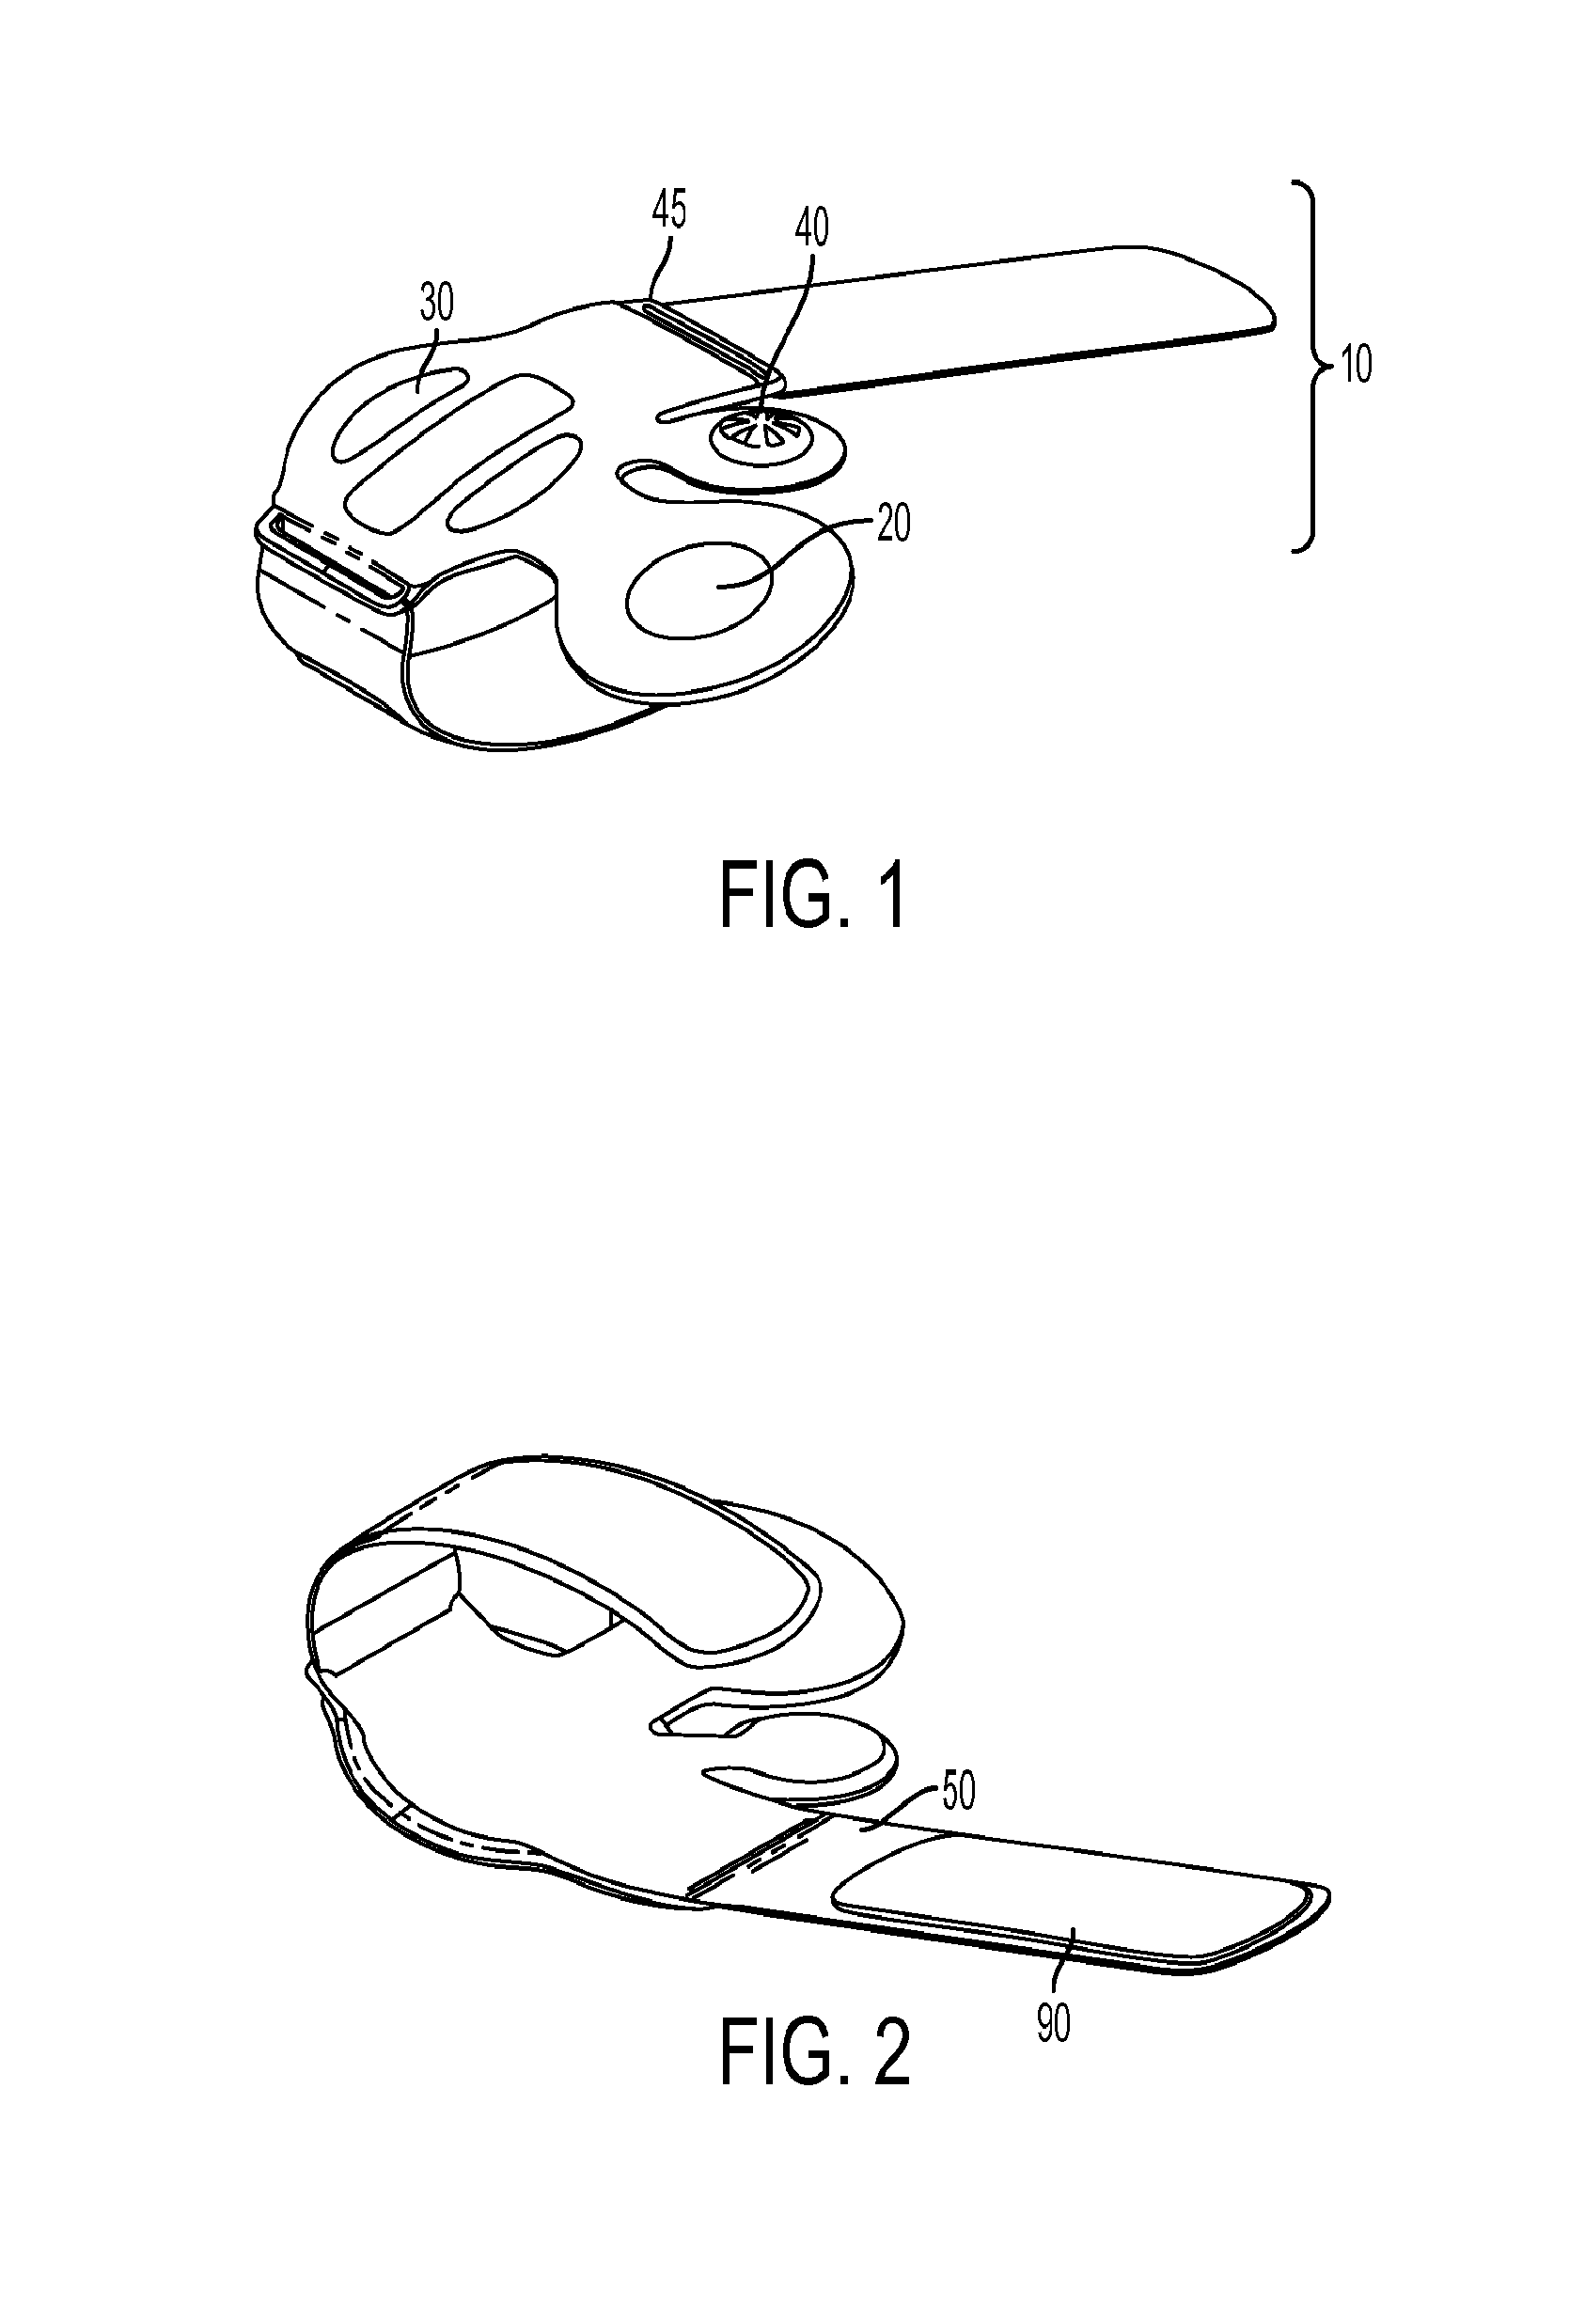 Methods and apparatus for a manual radial artery compression device